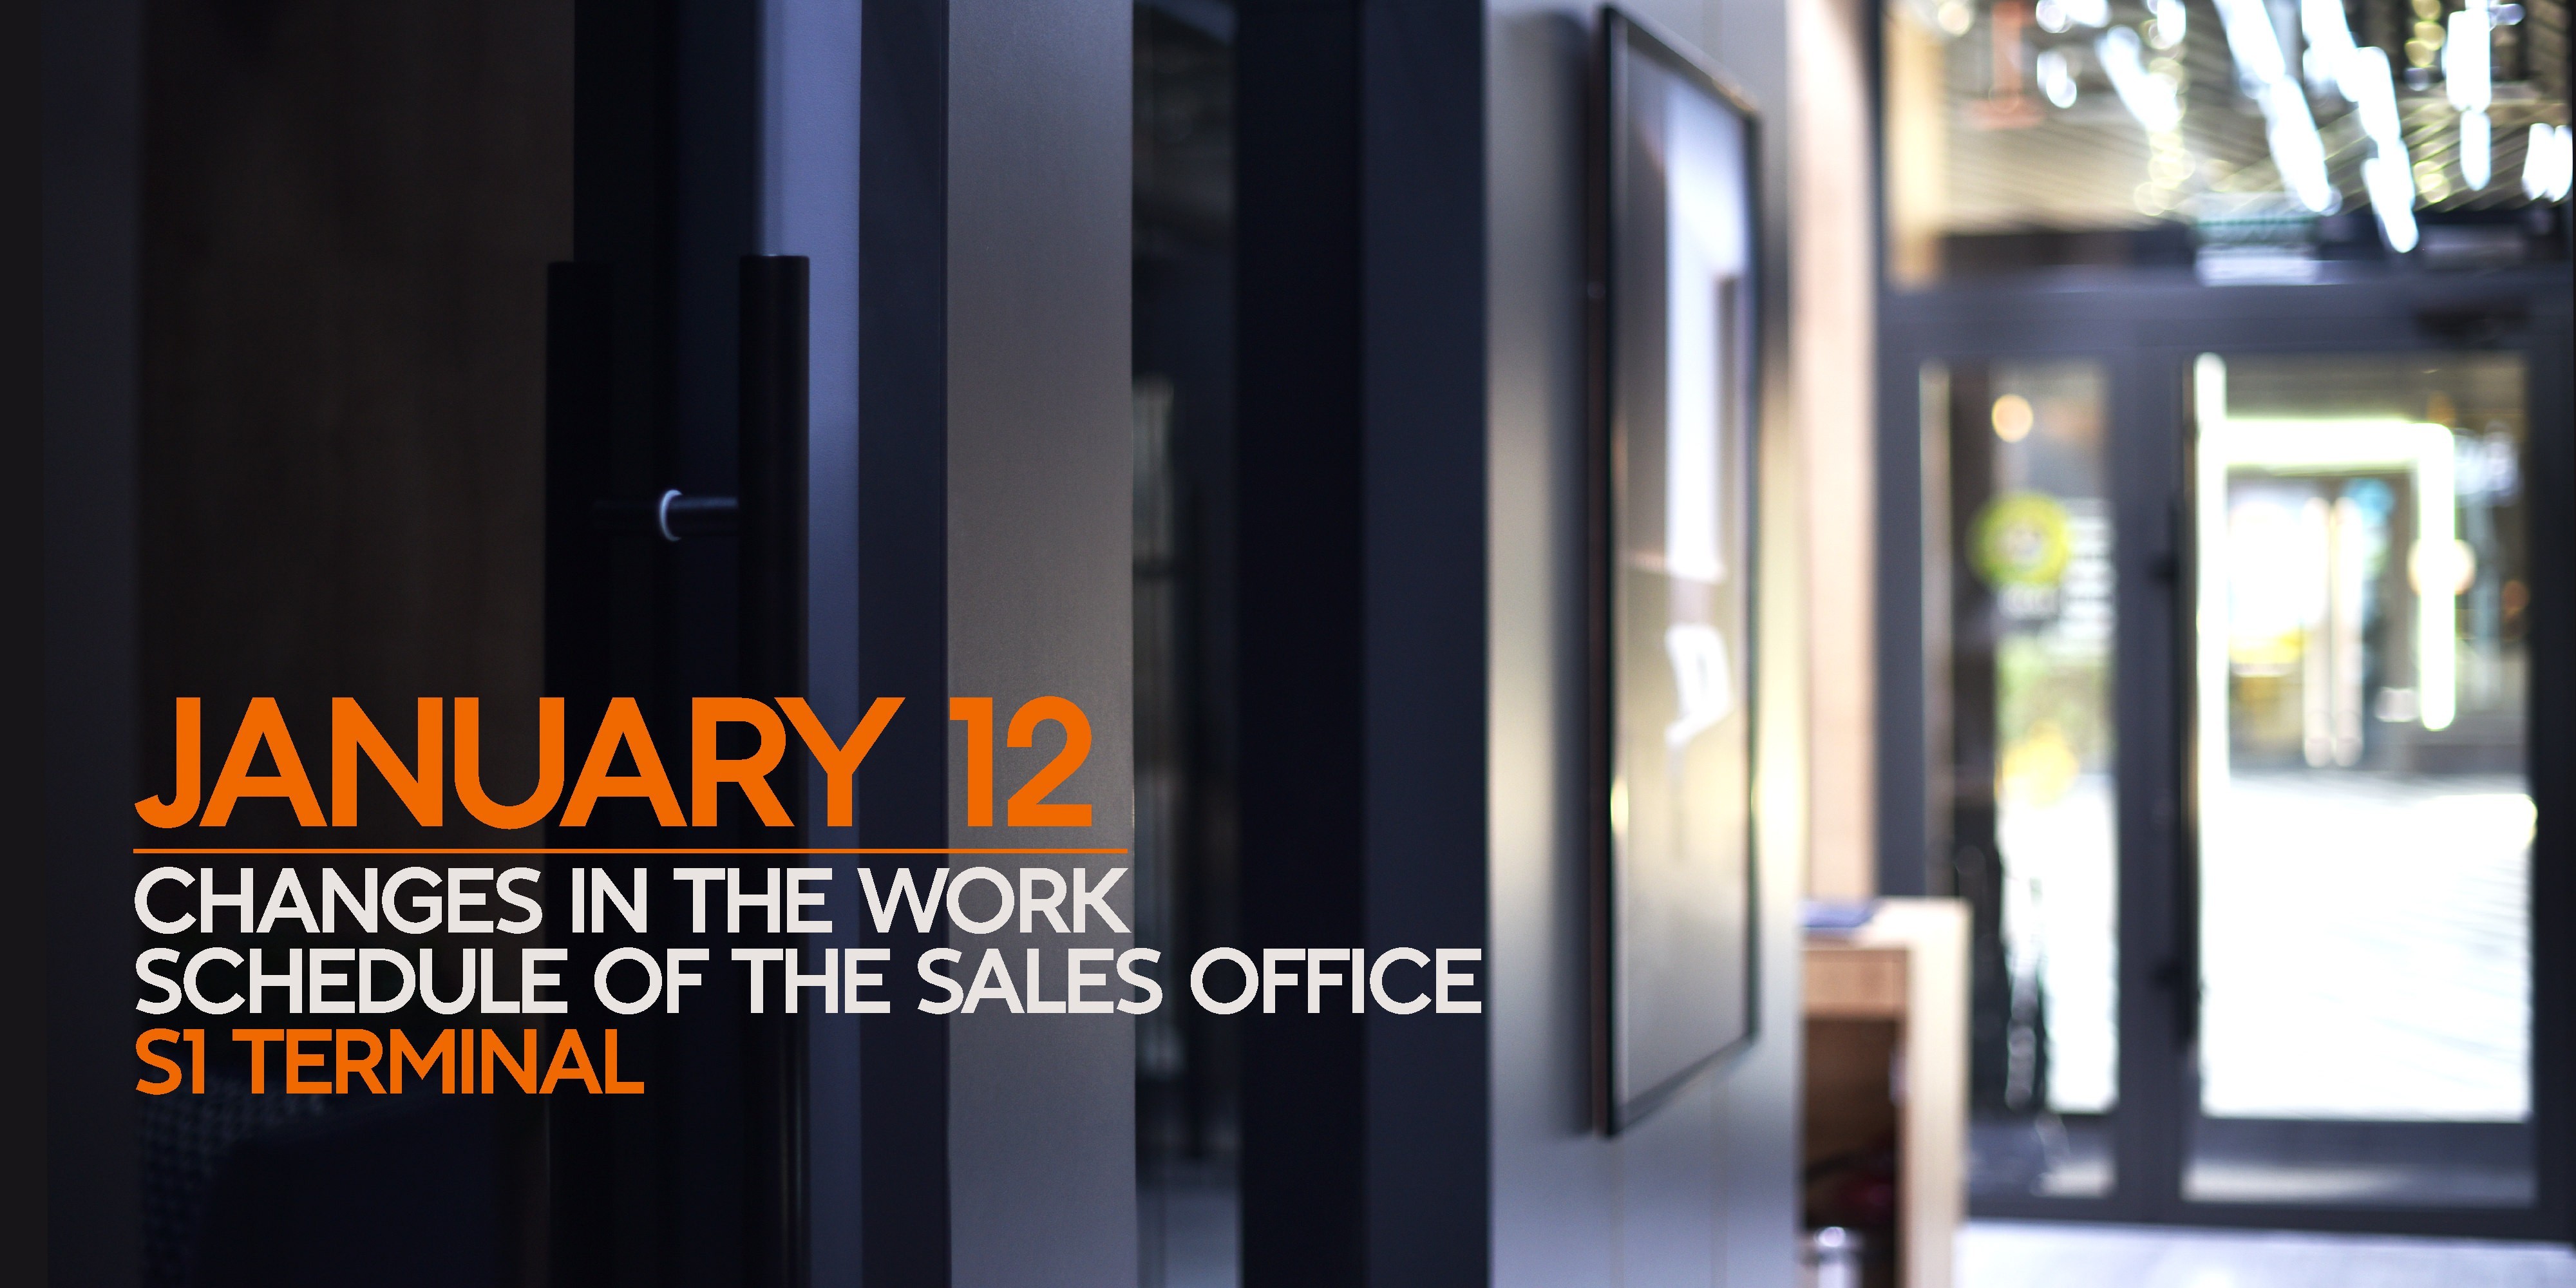 January 12: changes to the working hours of the S1 Terminal sales office